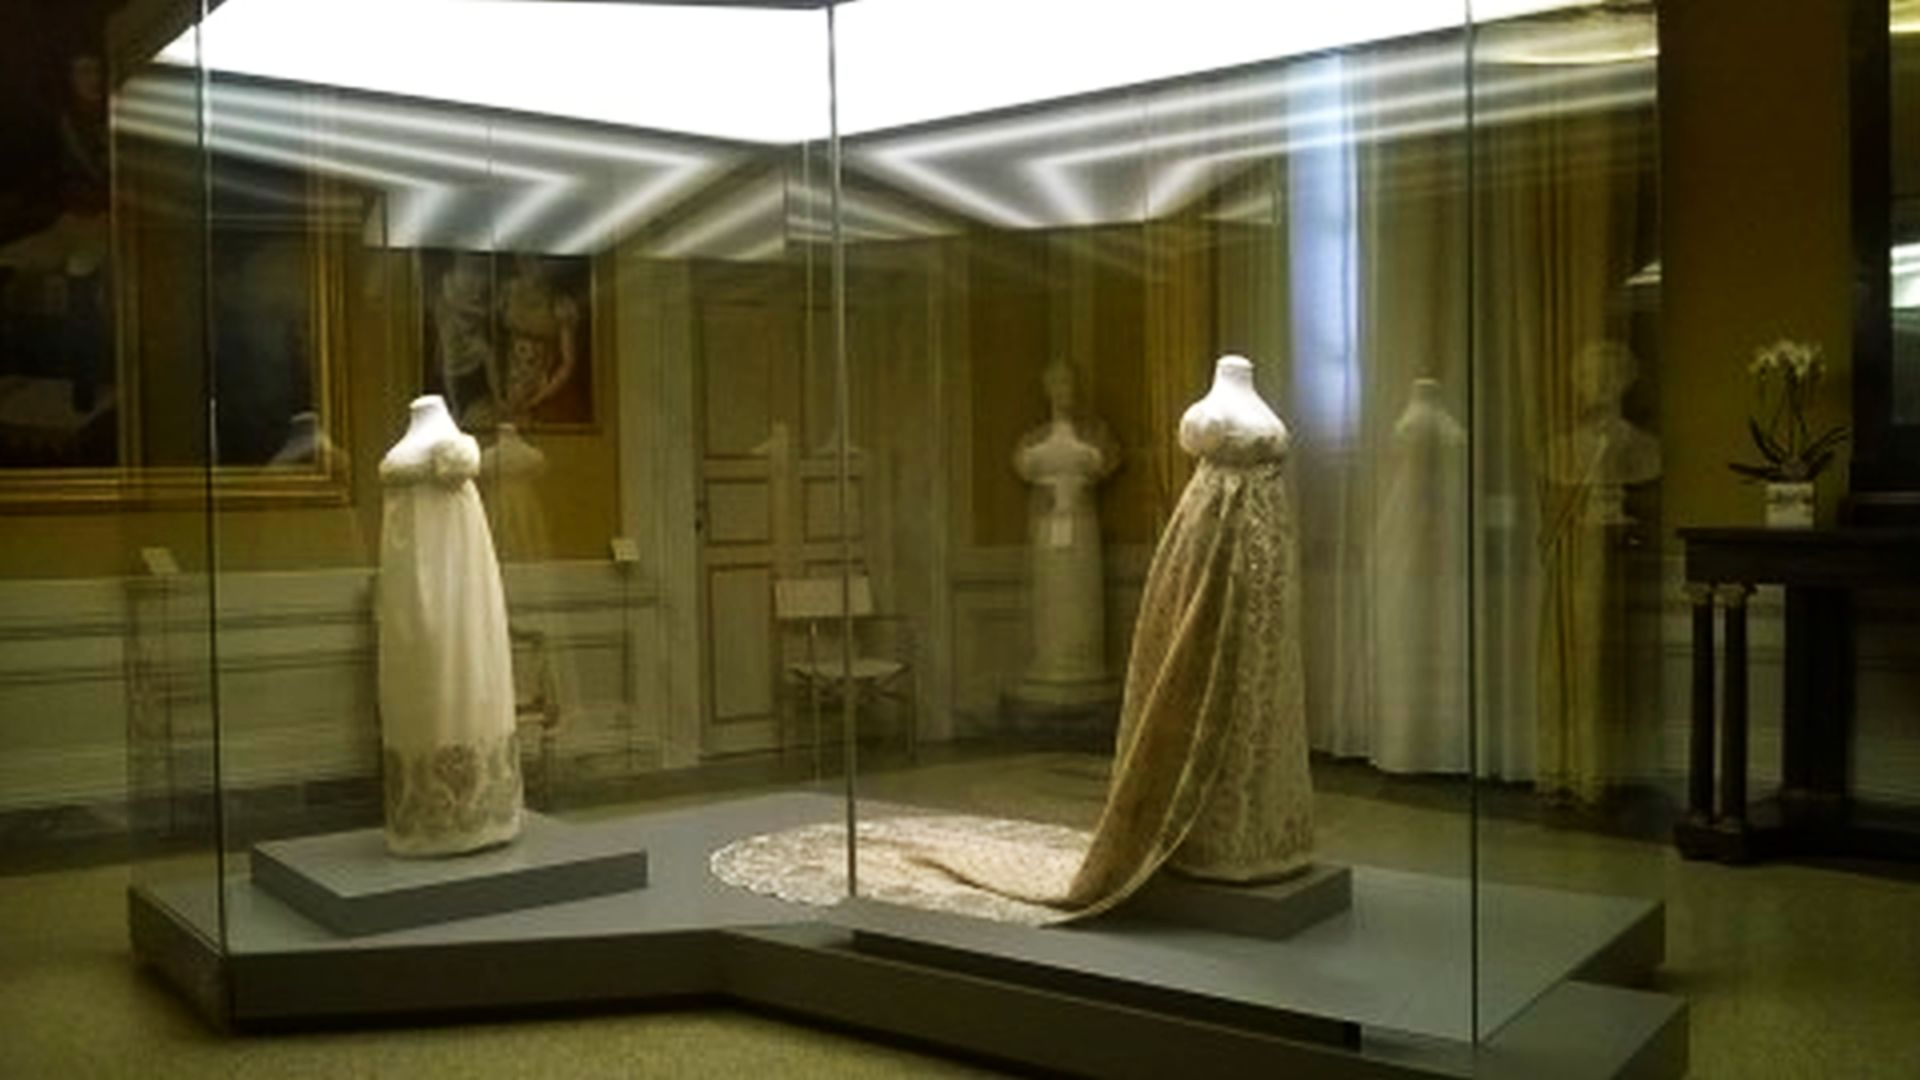 The imperial clothes of Palazzo Mansi